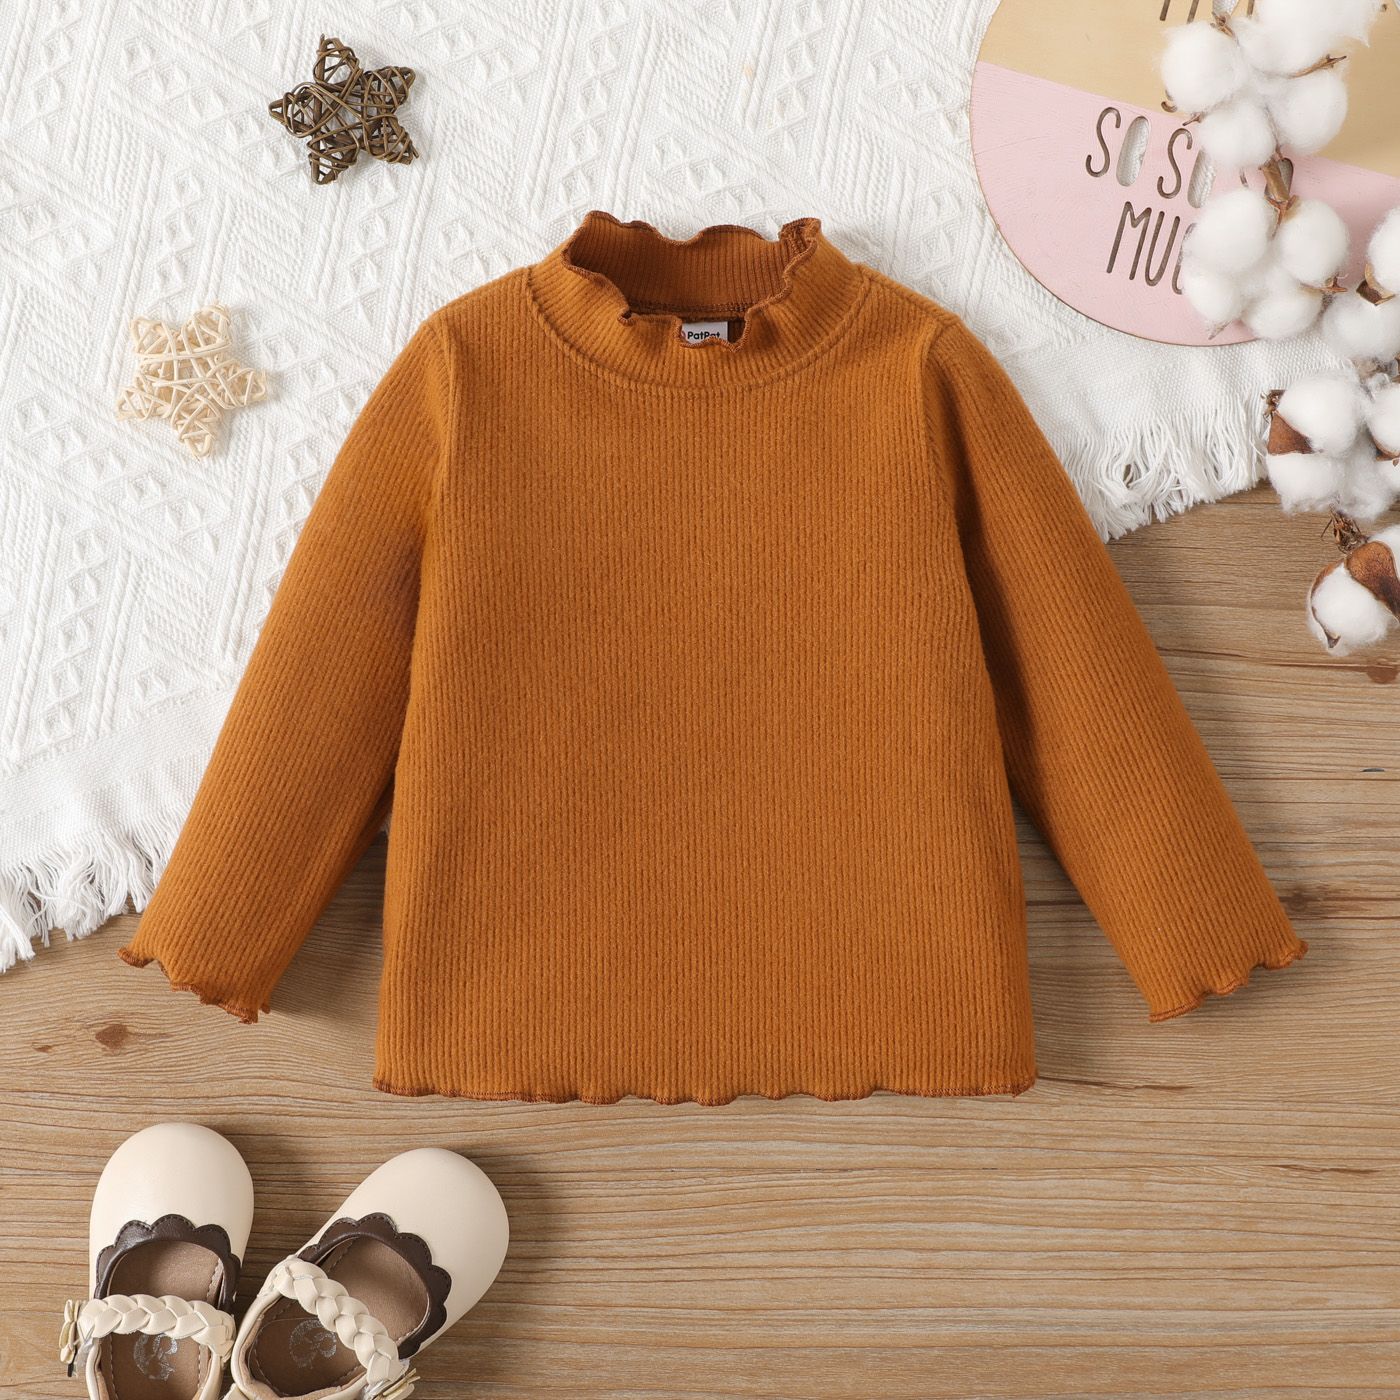 Baby Girl Solid Color Stand Collar Tee